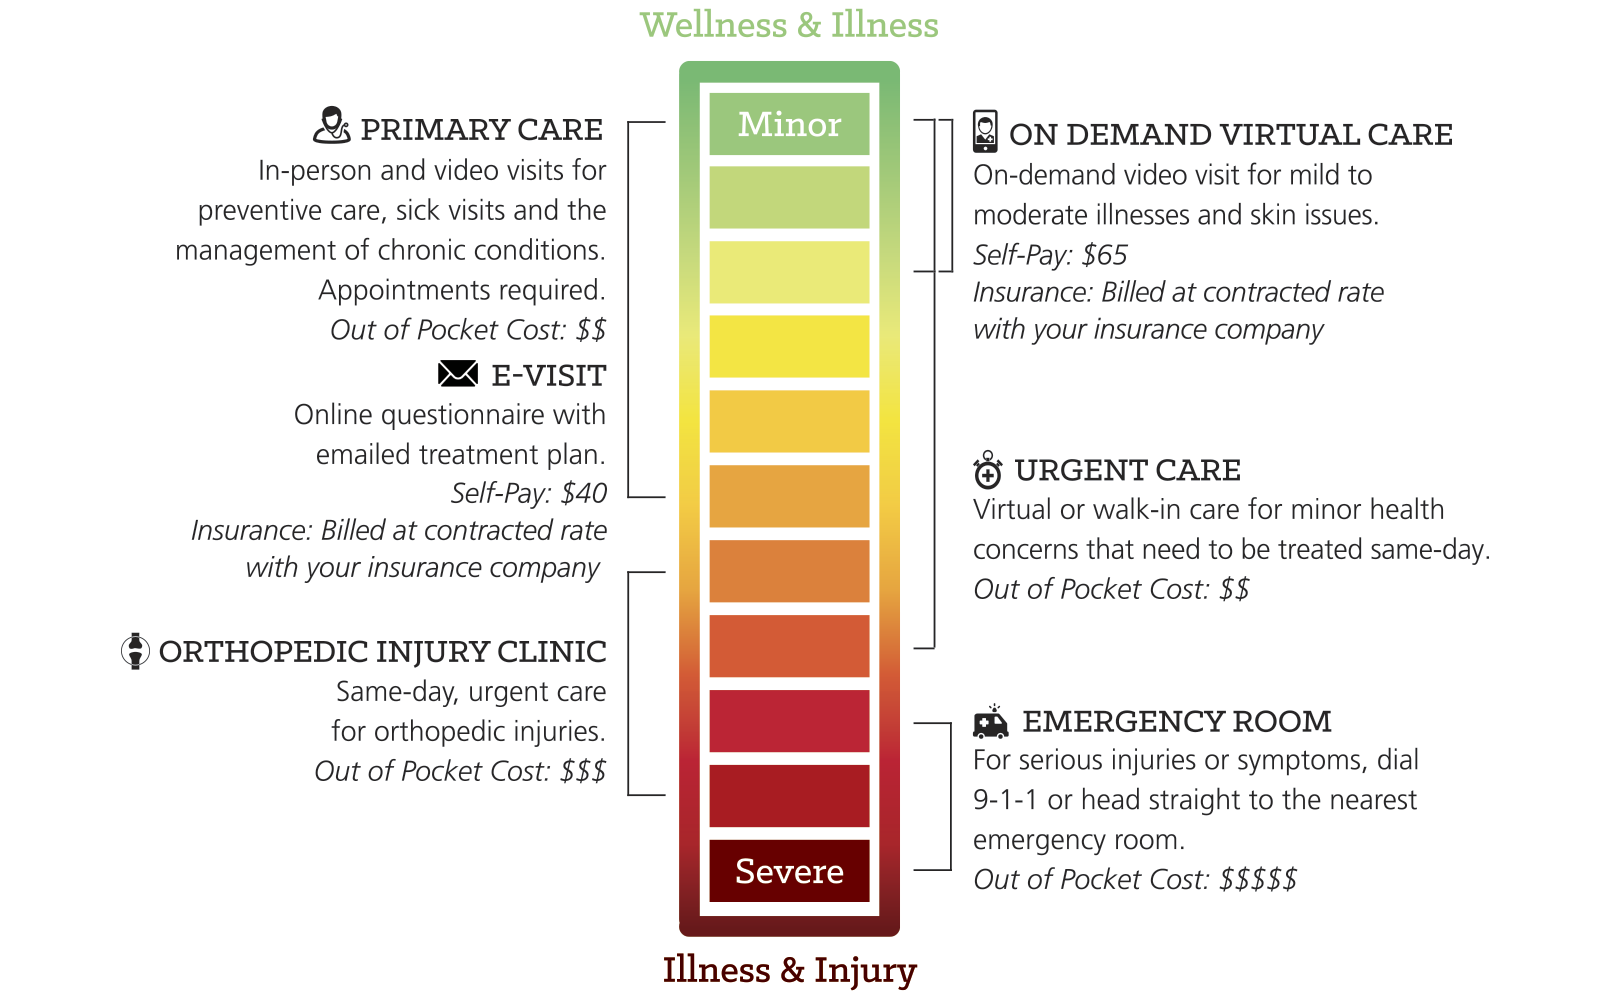 A chart depicting what UH care option may best suit your needs ranging from on demand video care for minor illness or injury to emergency rooms for severe illness and injury